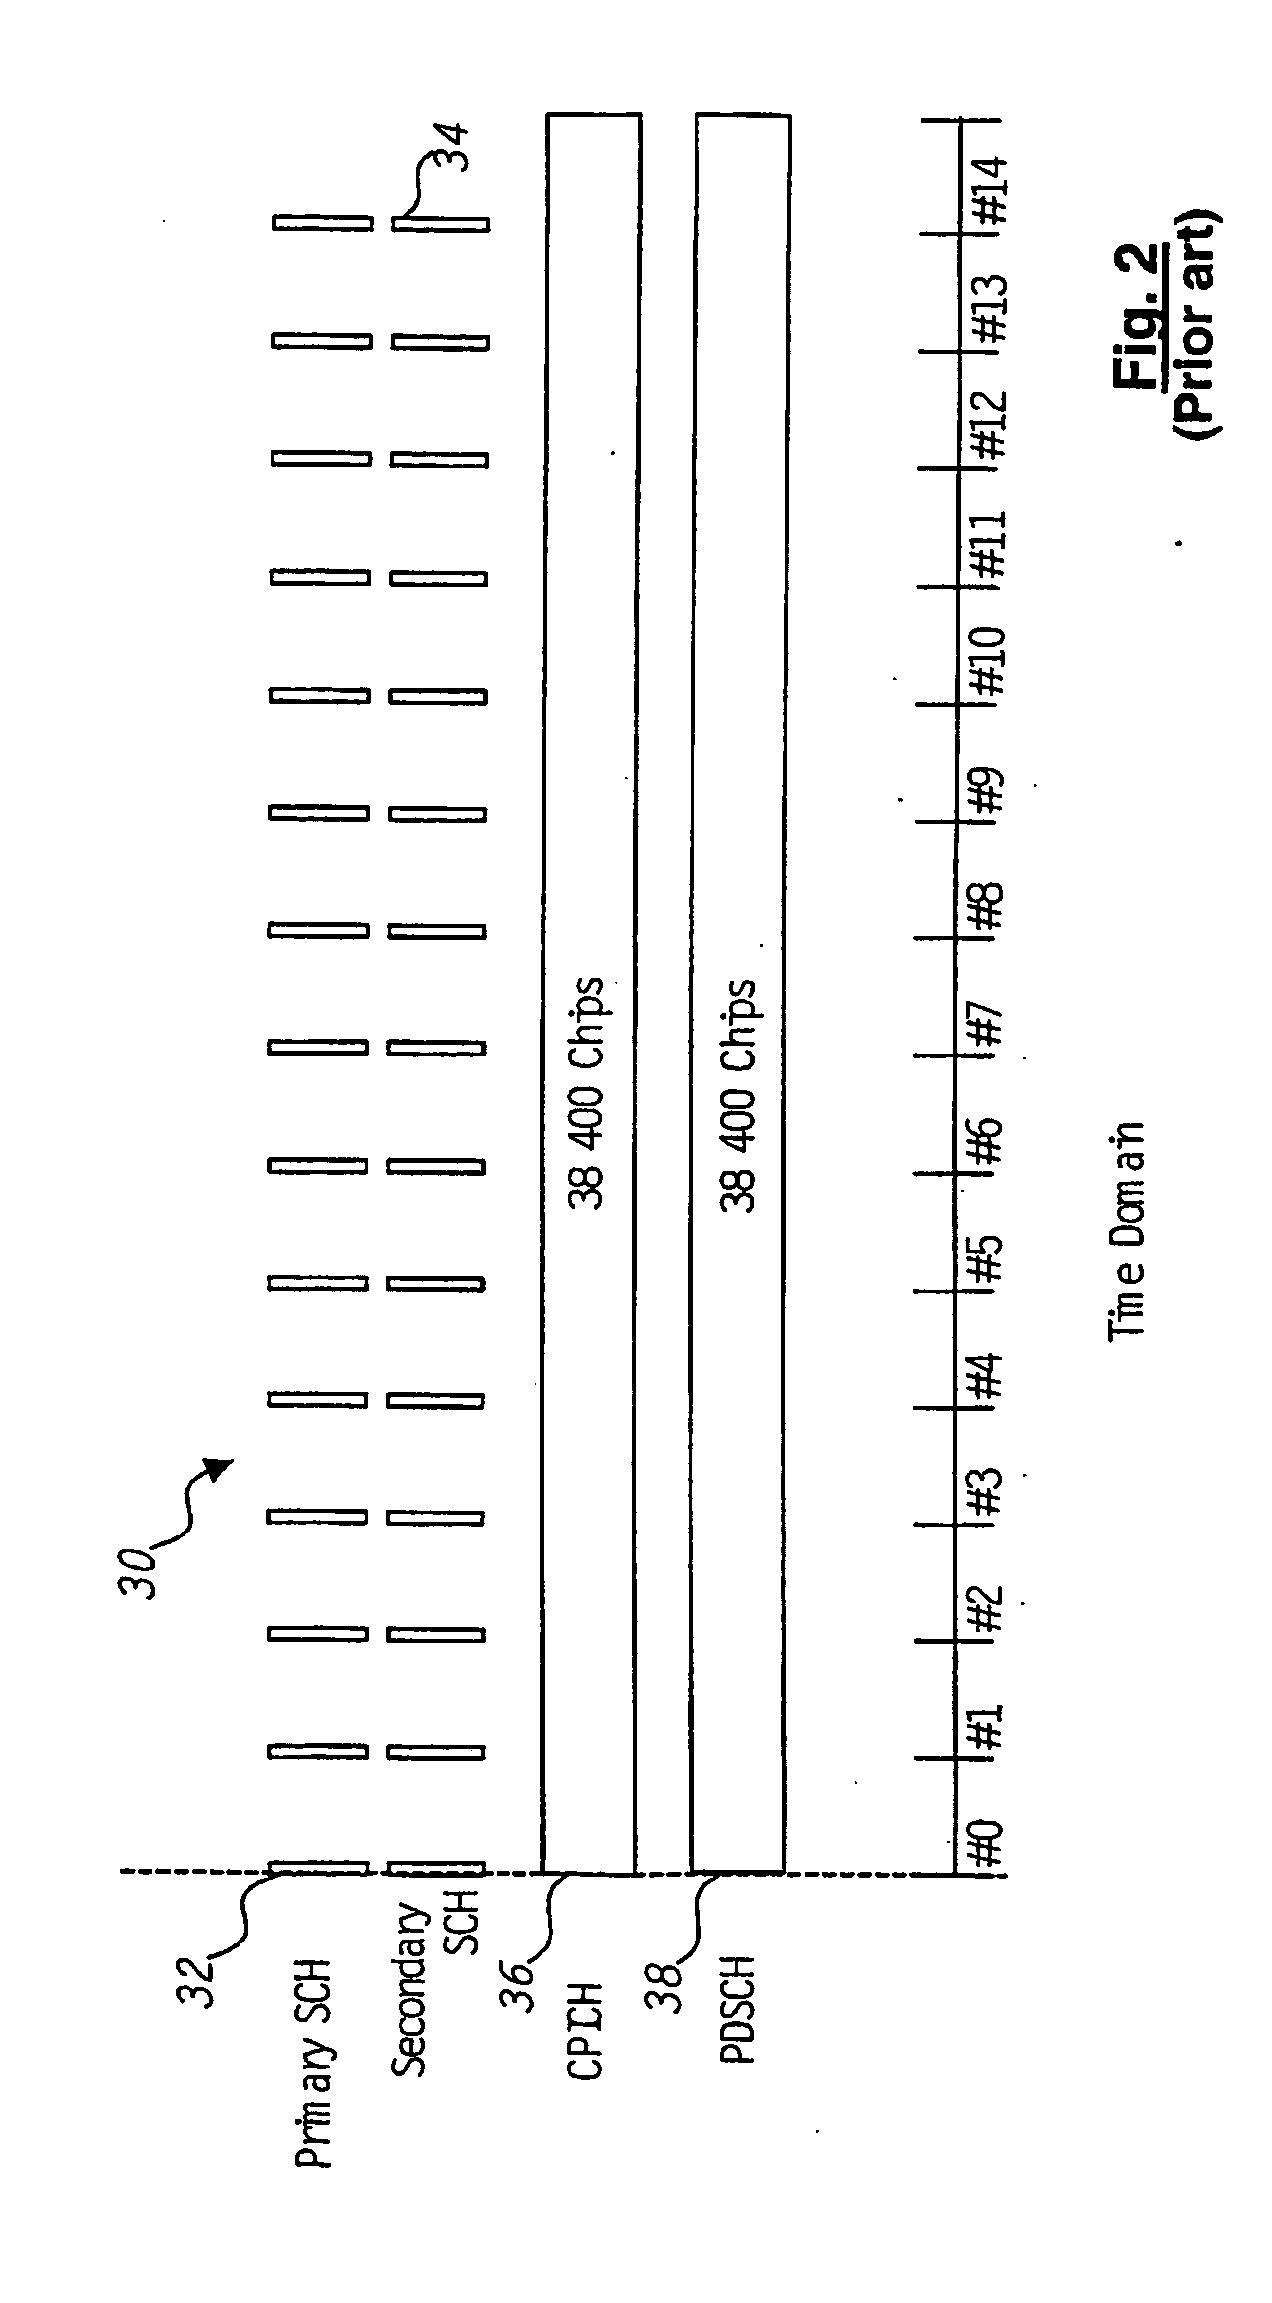 Method of and apparatus for communication via multiplexed links